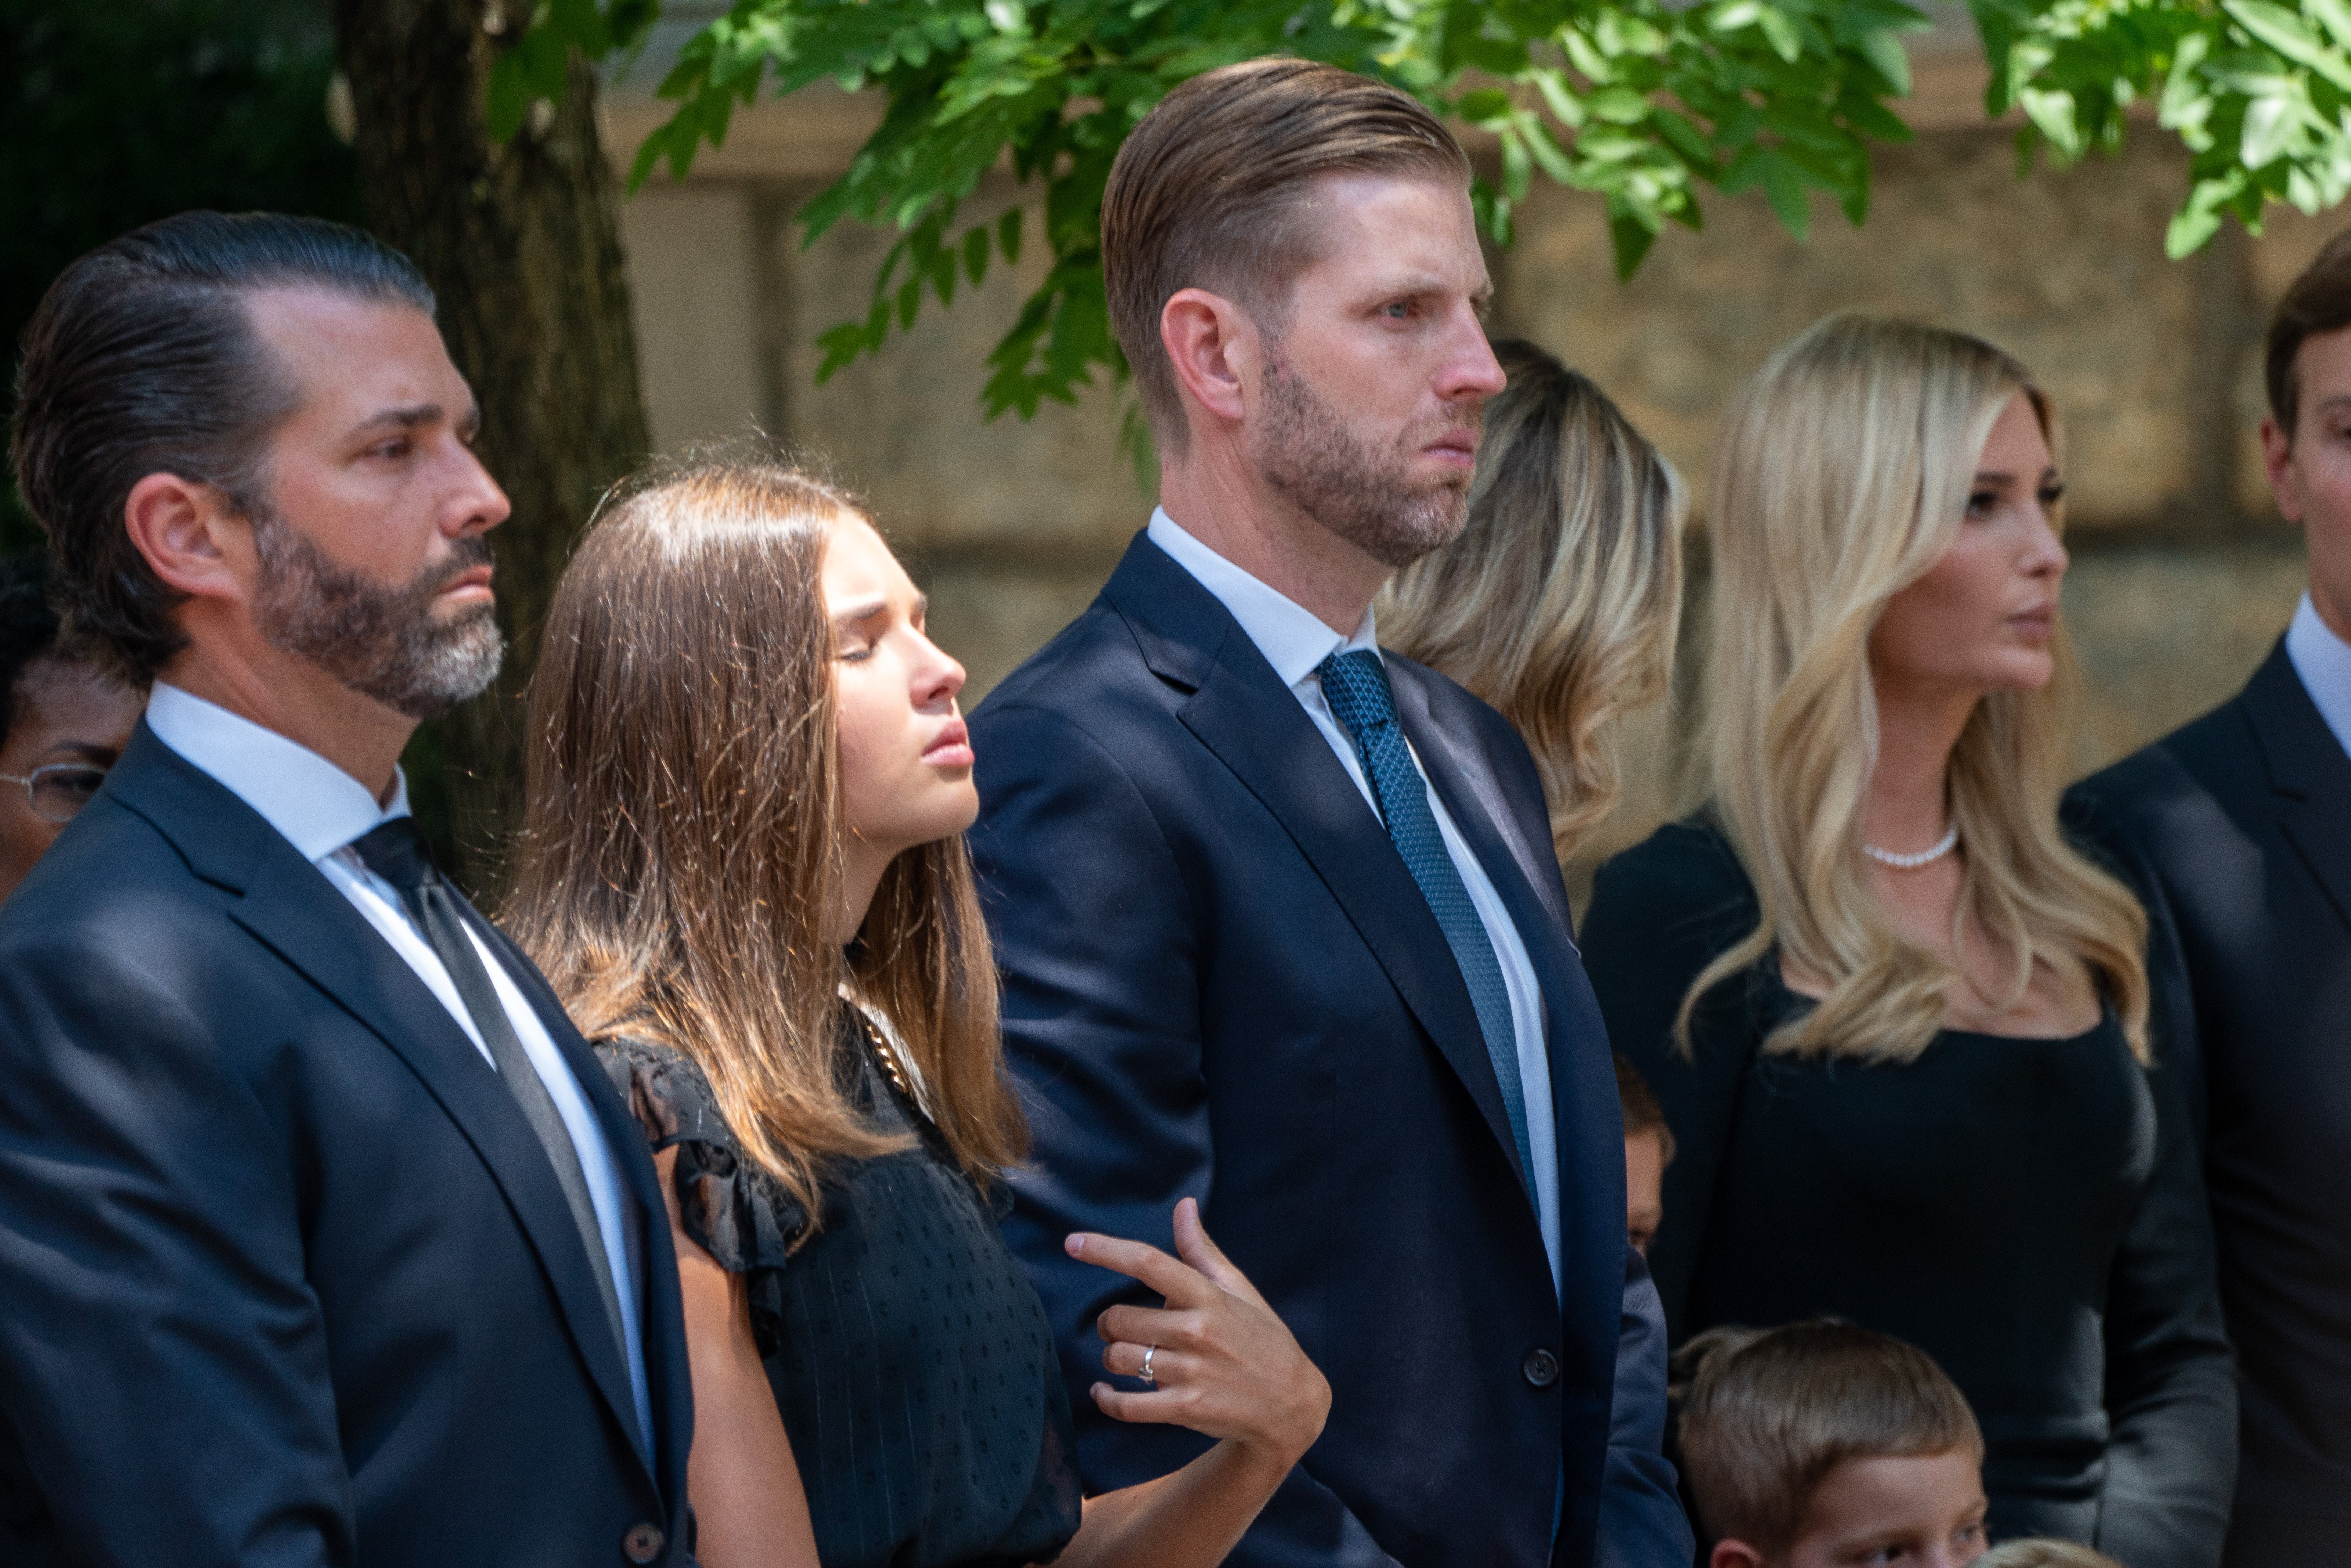 Donald Trump Jr., (L) Eric Trump, and Ivanka Trump arriving at the funeral of their mother Ivana Trump on July 20, 2022 in New York.┃Source: Getty Images